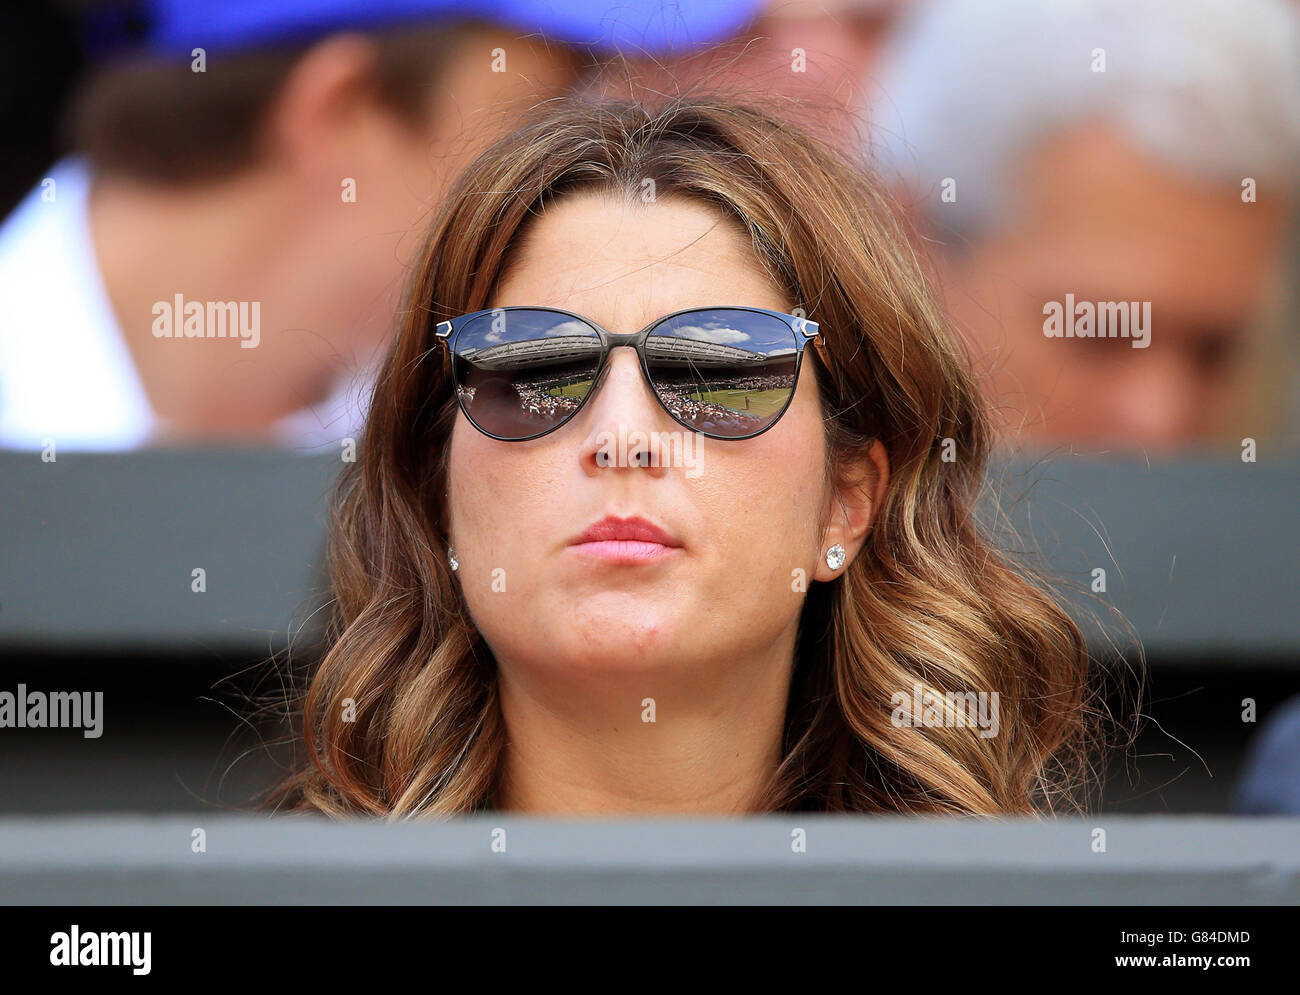 Mirka Federer in the players box as she waits for Roger Federer to appear on court during day Six of the Wimbledon Championships at the All England Lawn Tennis and Croquet Club, Wimbledon. Stock Photo